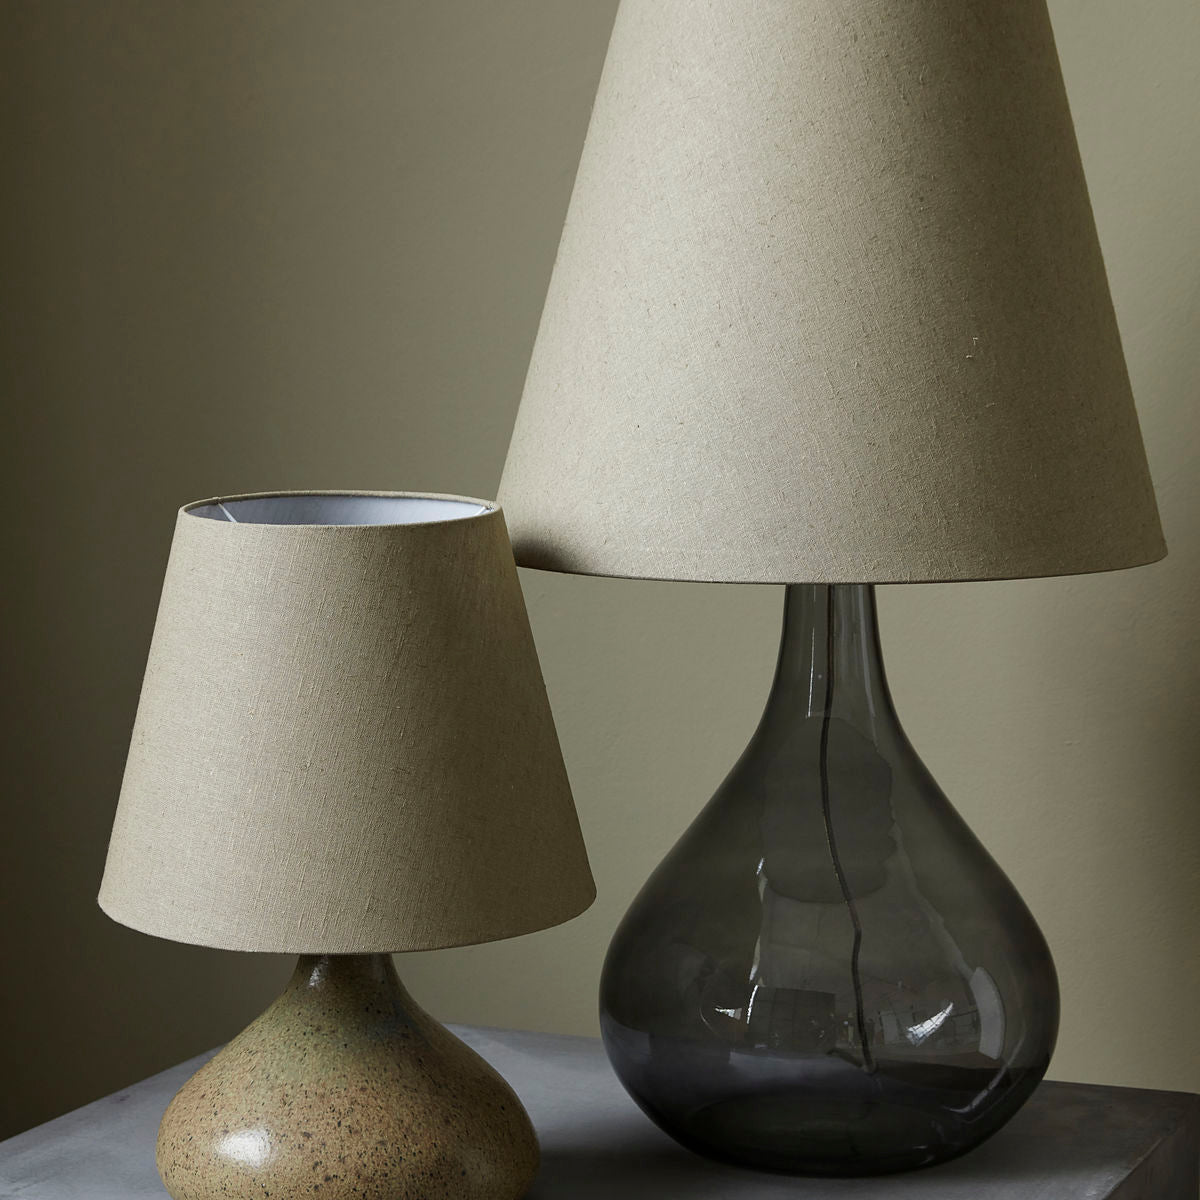 Lampshade, Illy, Green